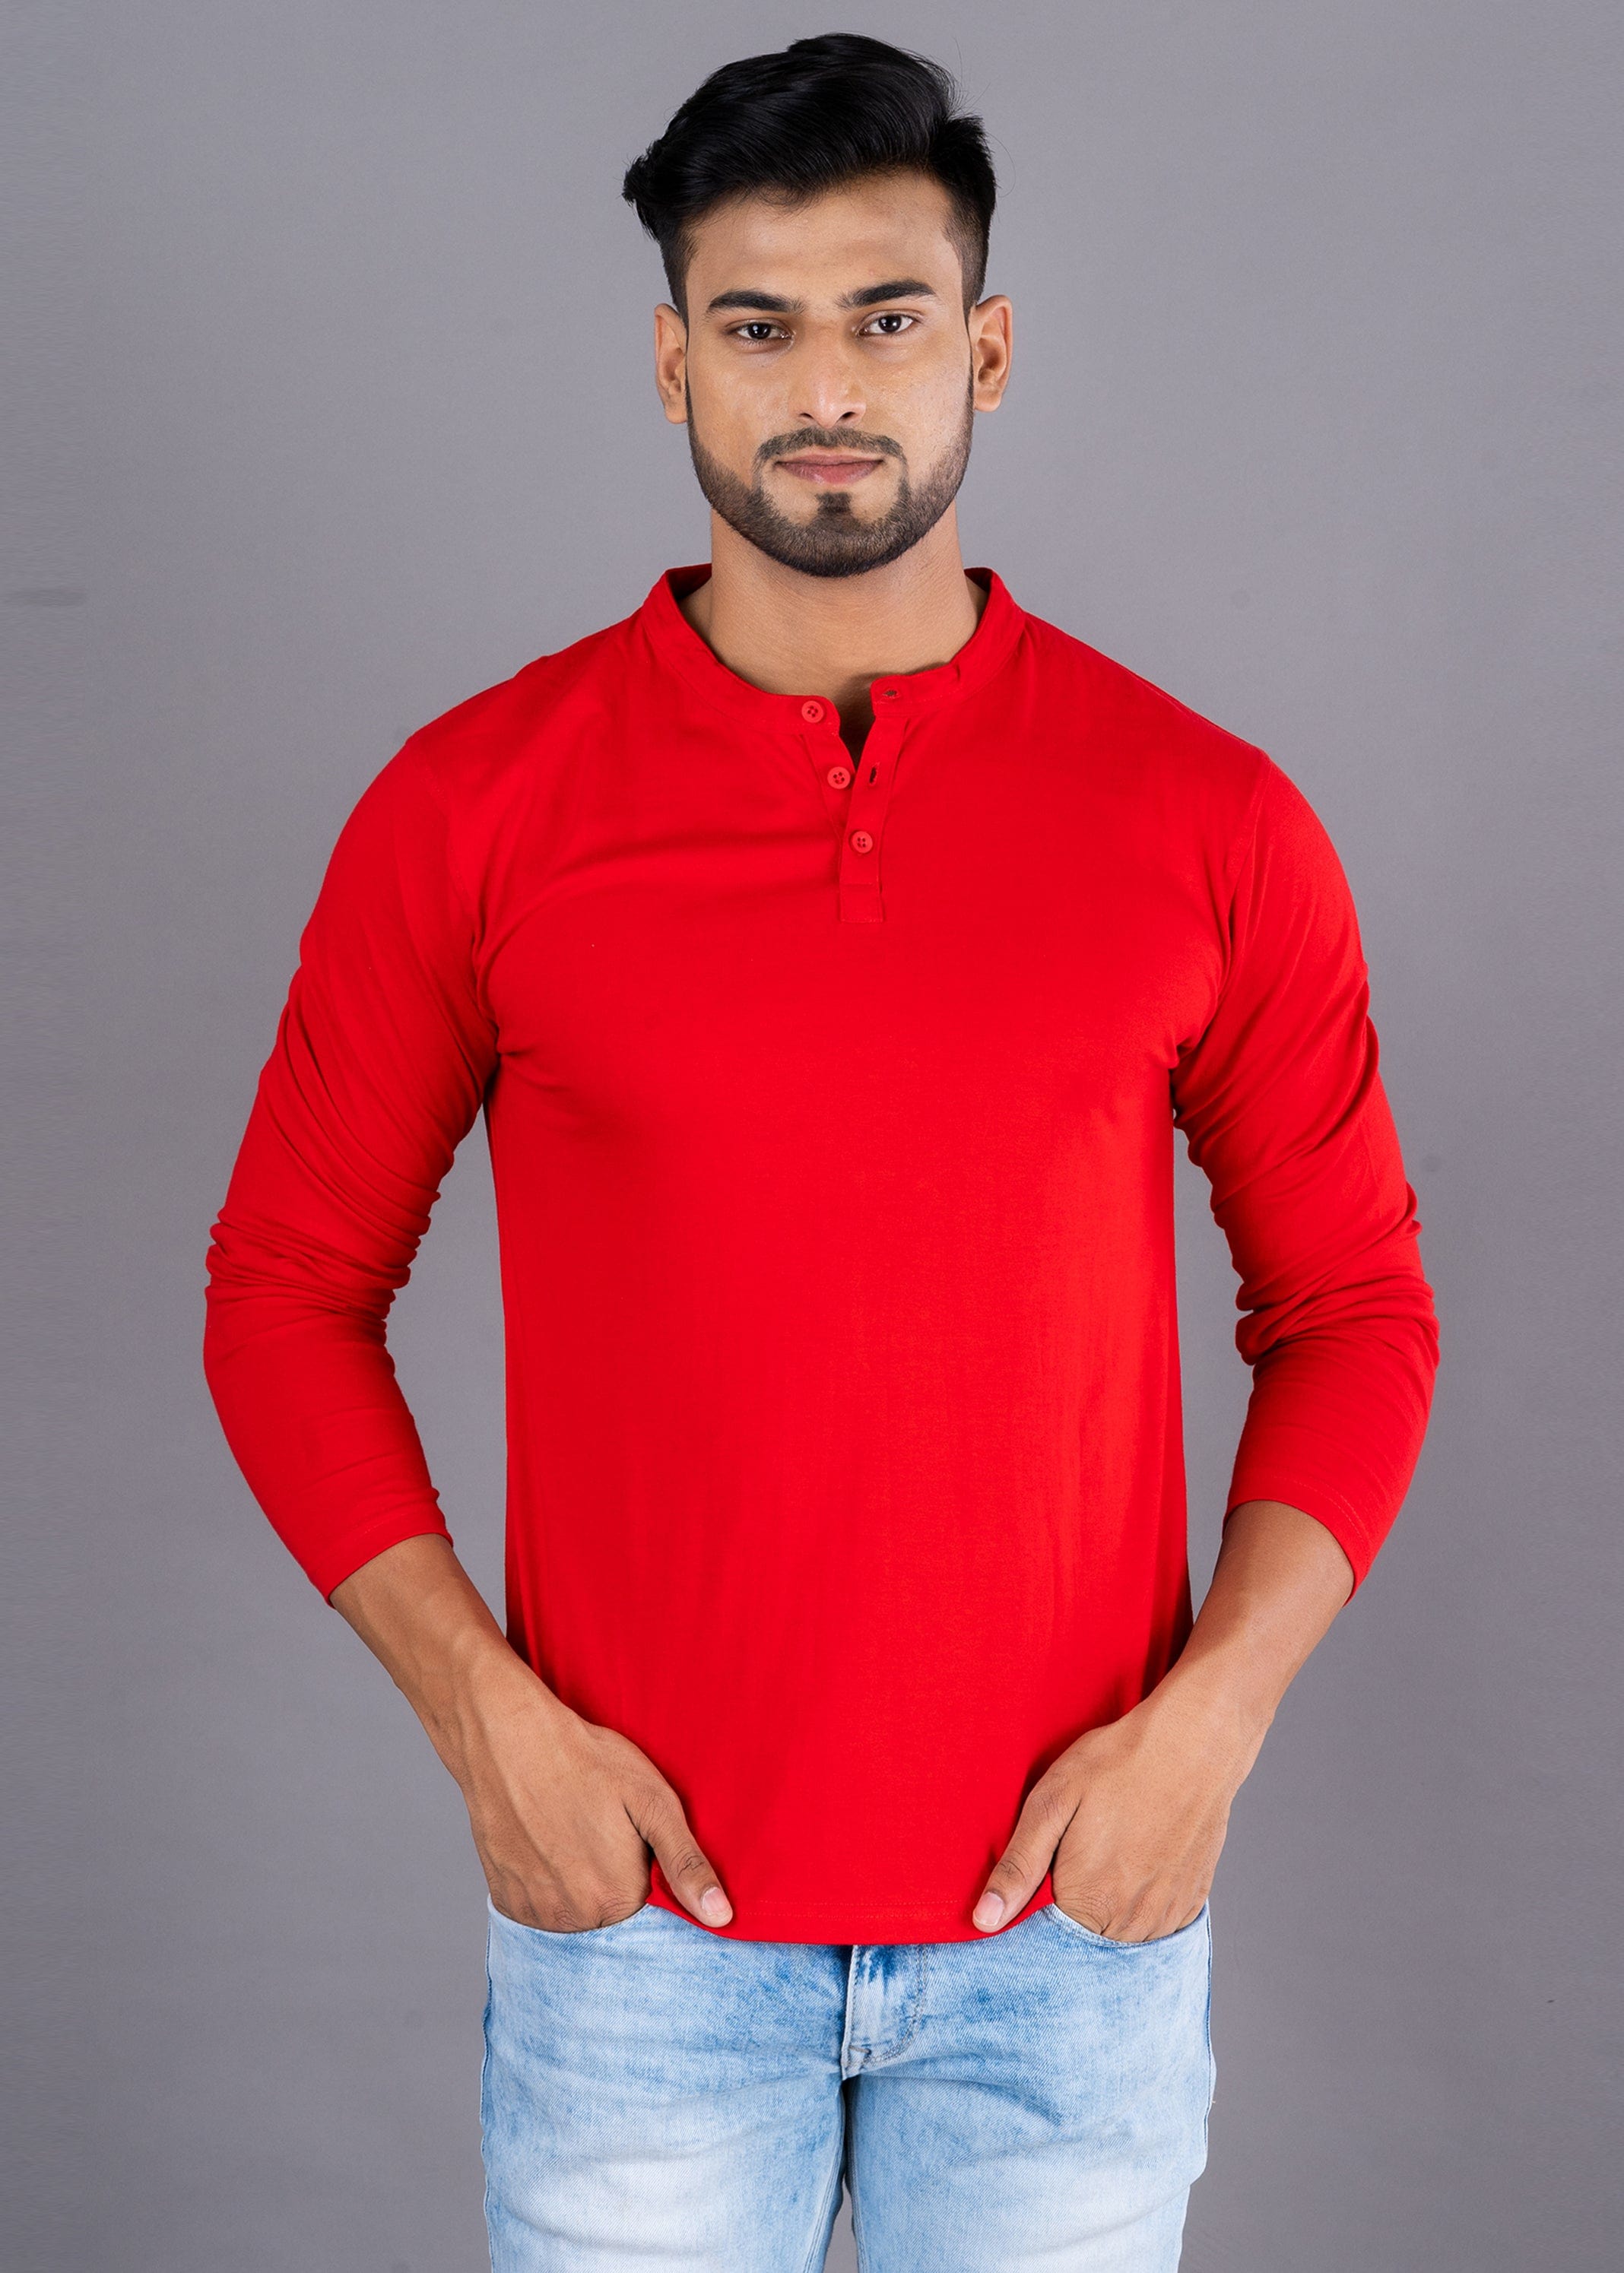 Solid Full Sleeve Premium Cotton Henley T-shirt For Men - Red